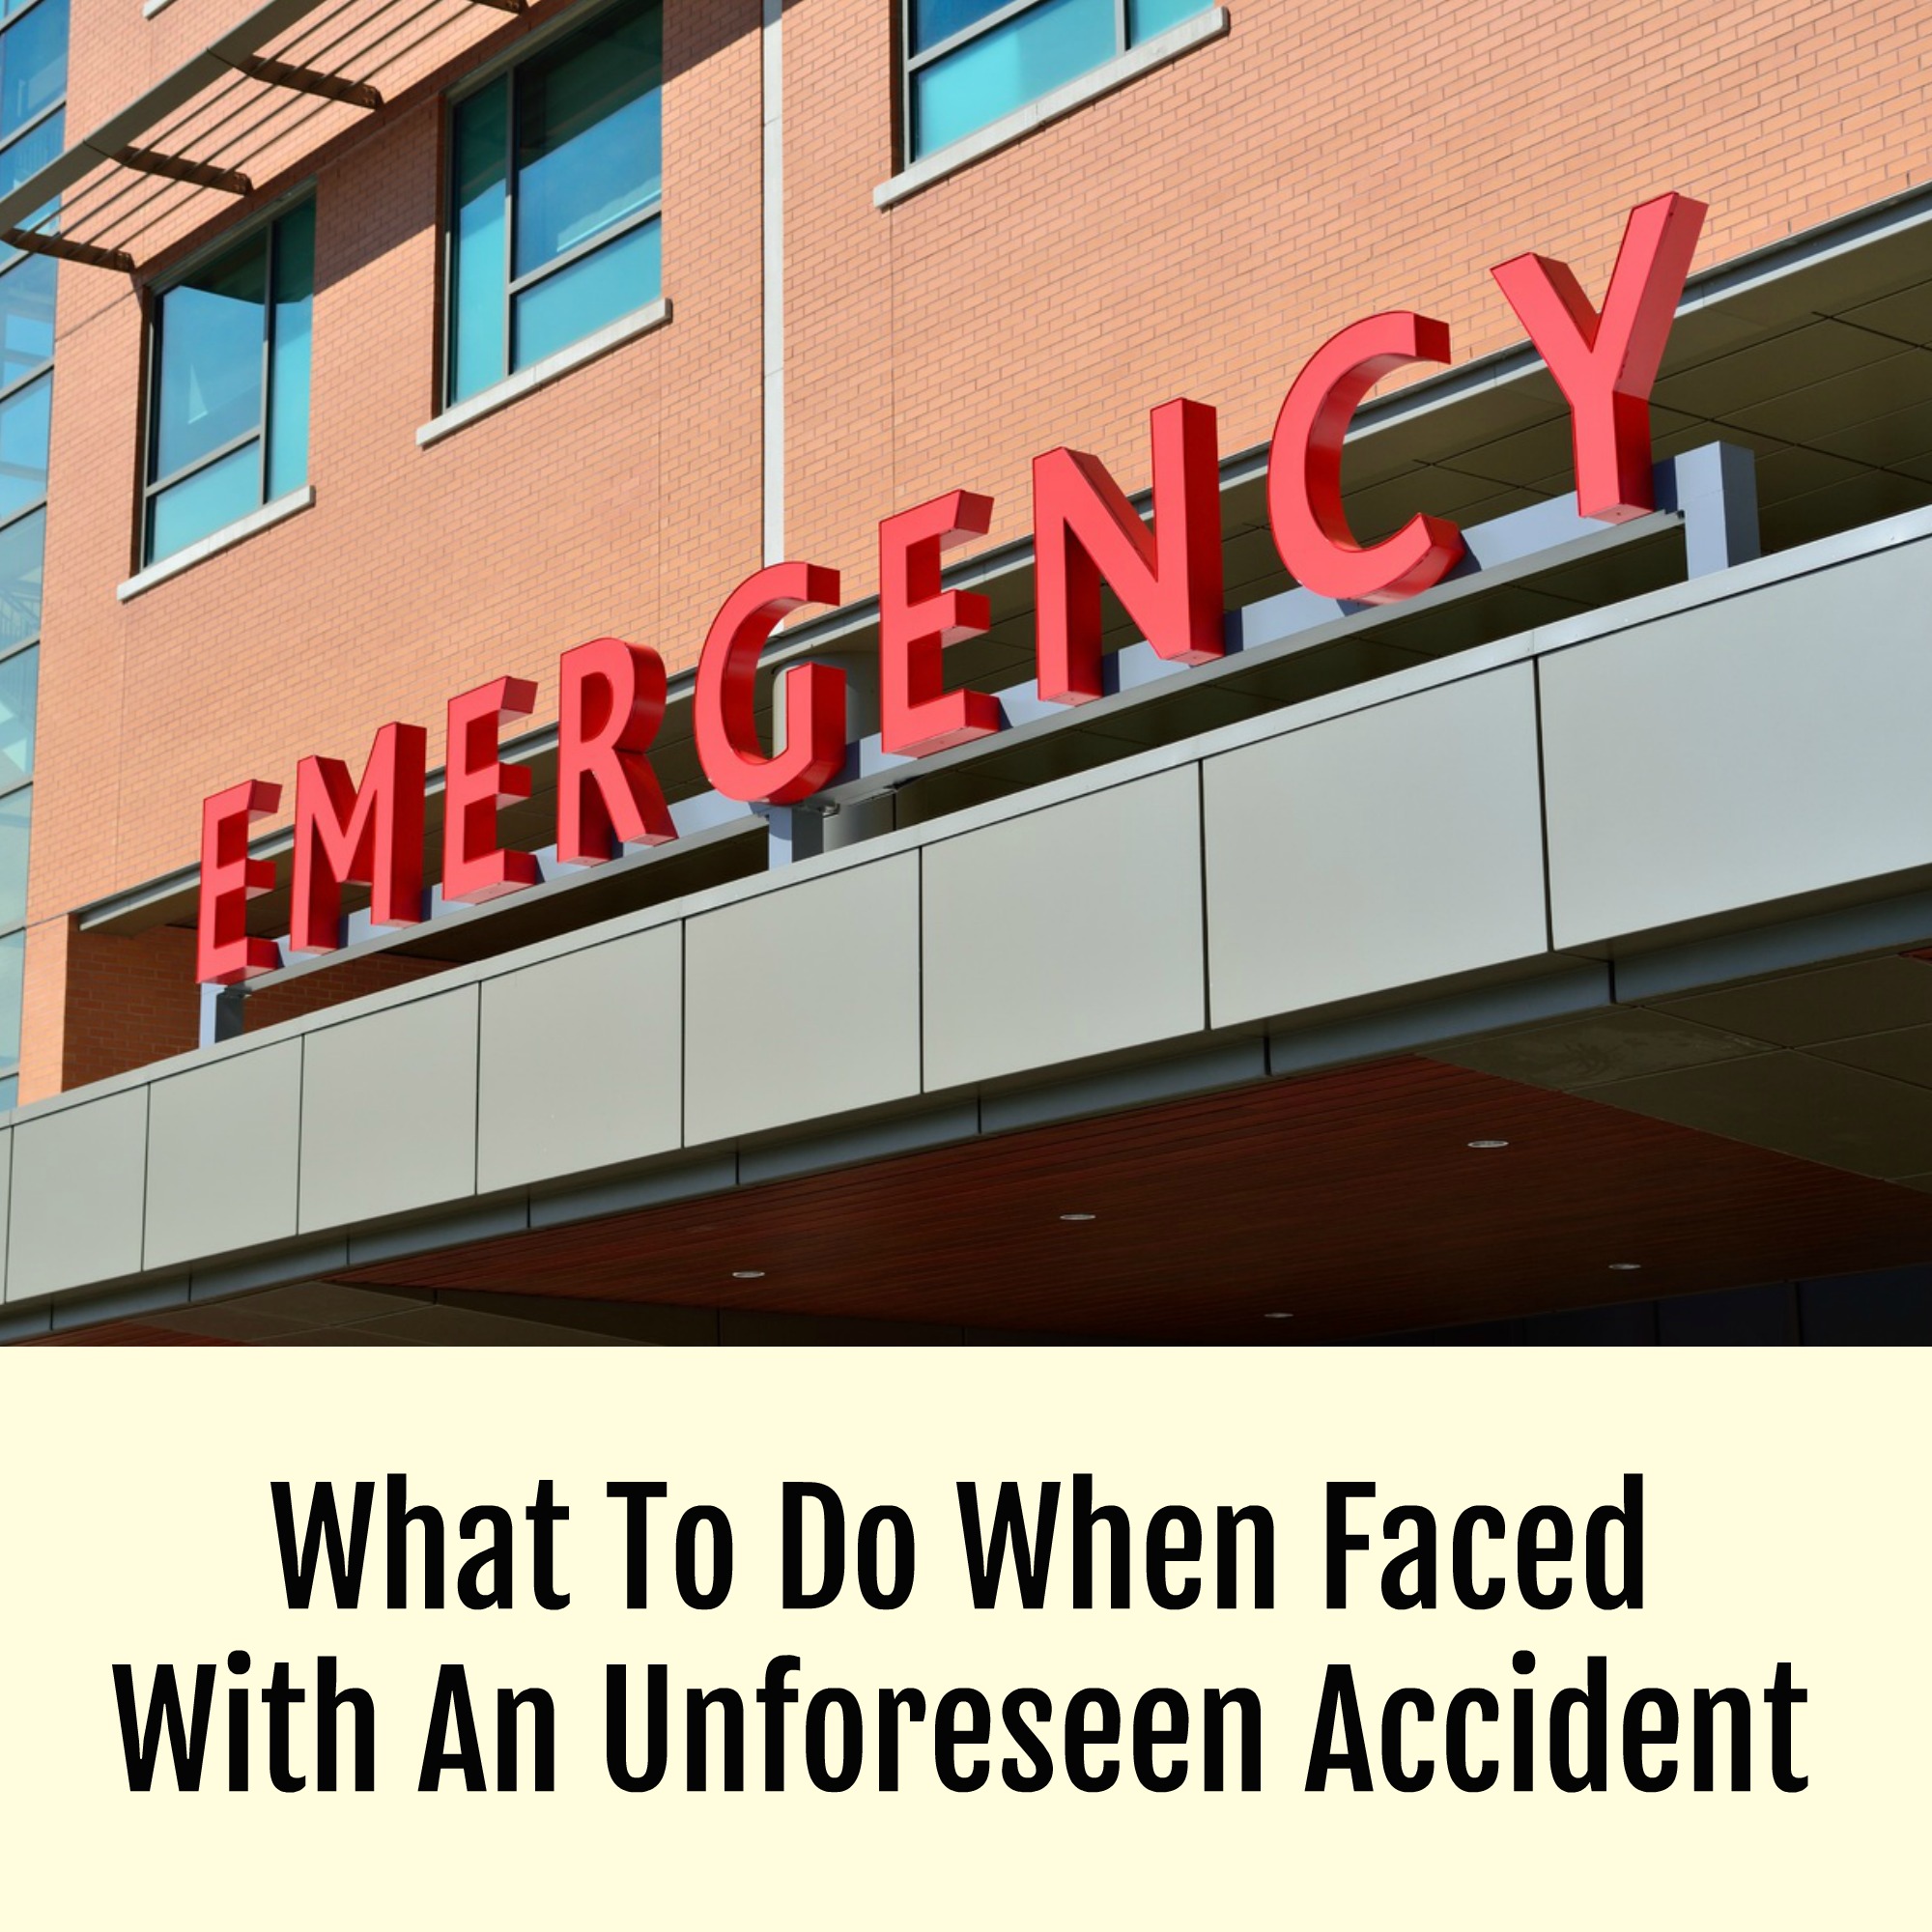 What To Do When Faced With An Unforeseen Accident